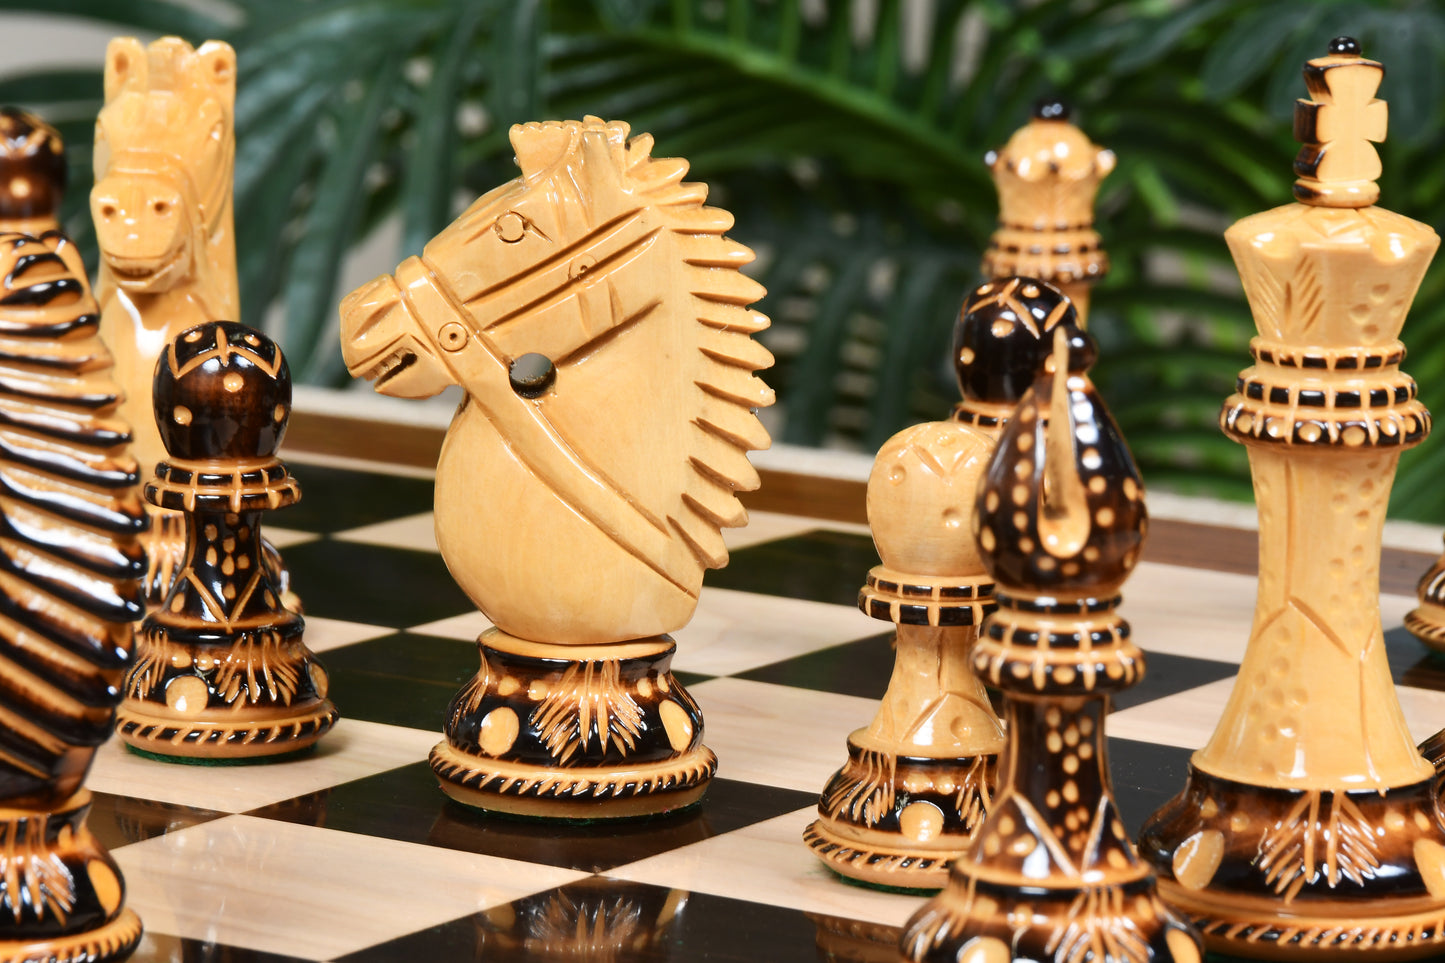 The Bridle Knight Series Wooden Chess Pieces in Burnt Boxwood - 4.0" King